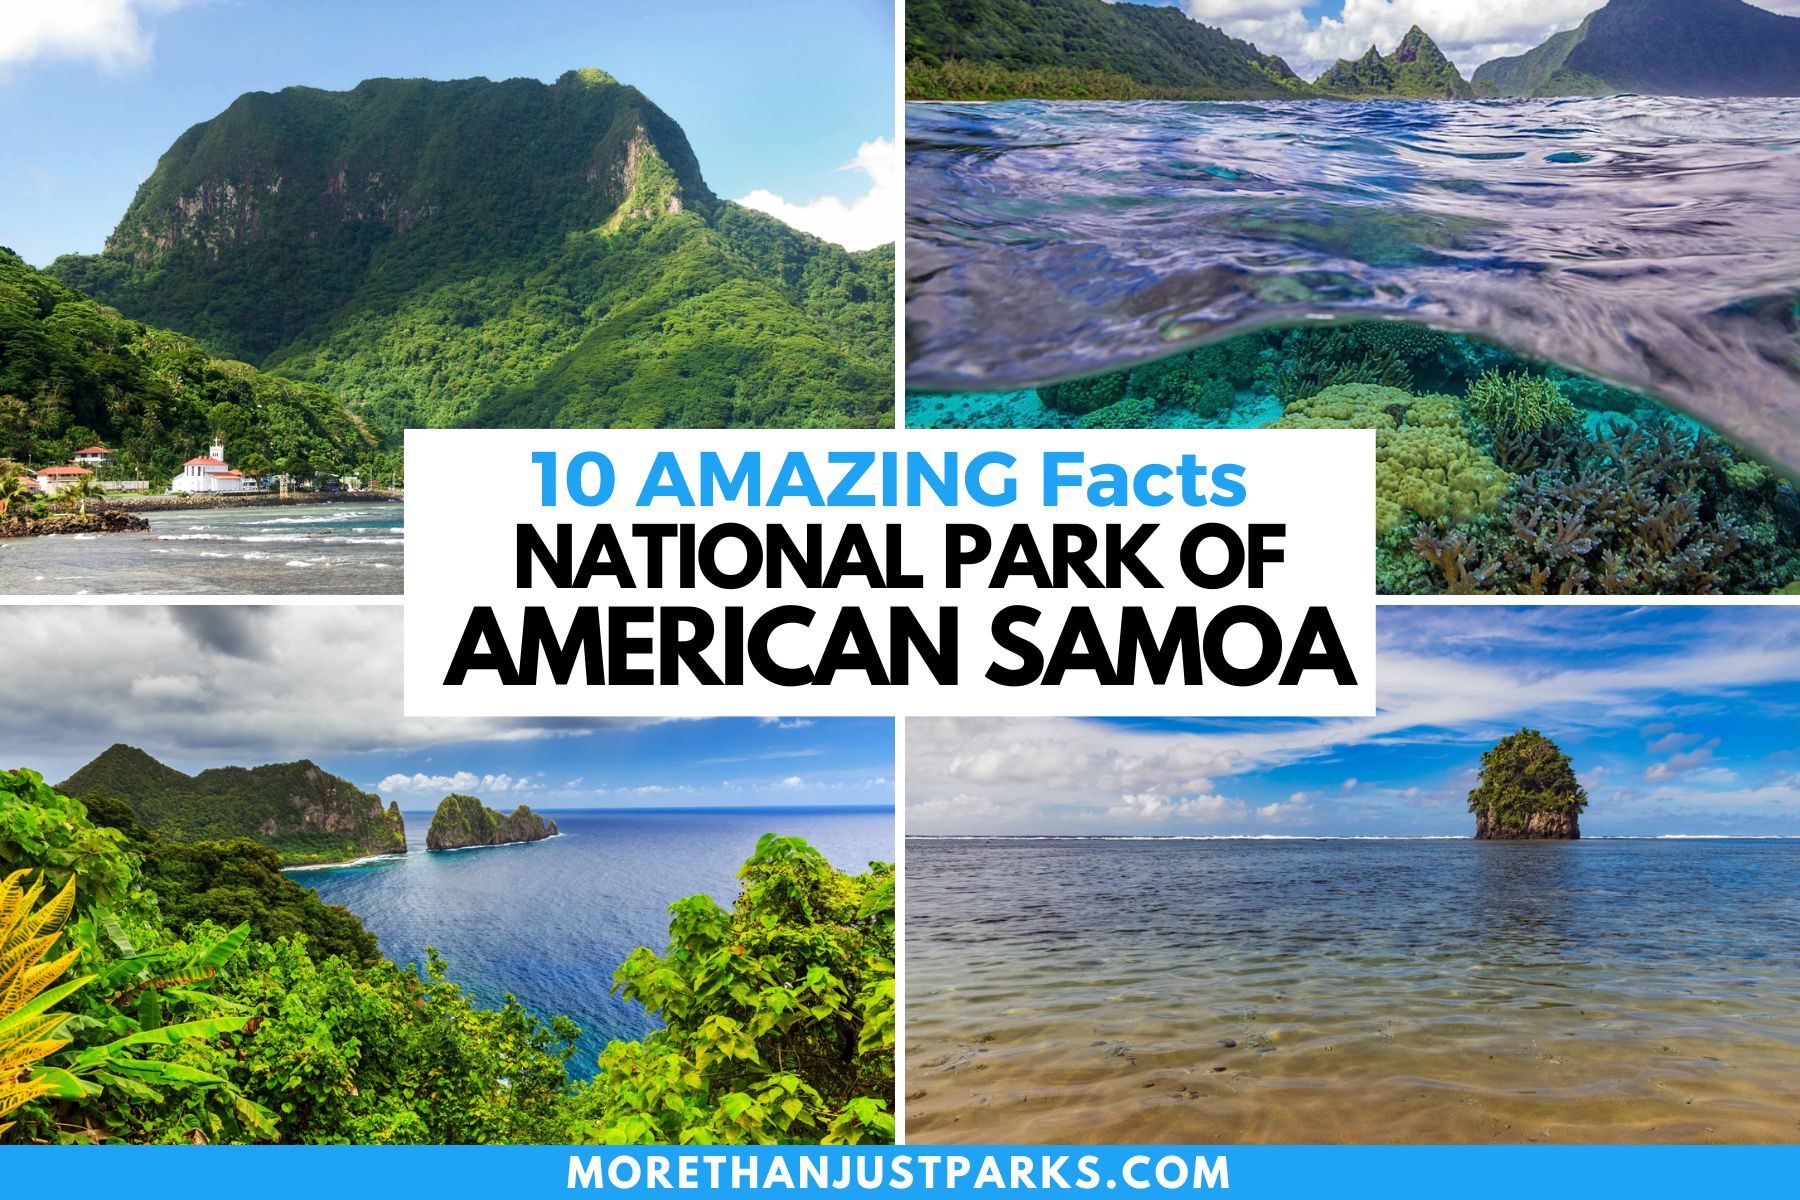 National Park of American Samoa Facts Graphic